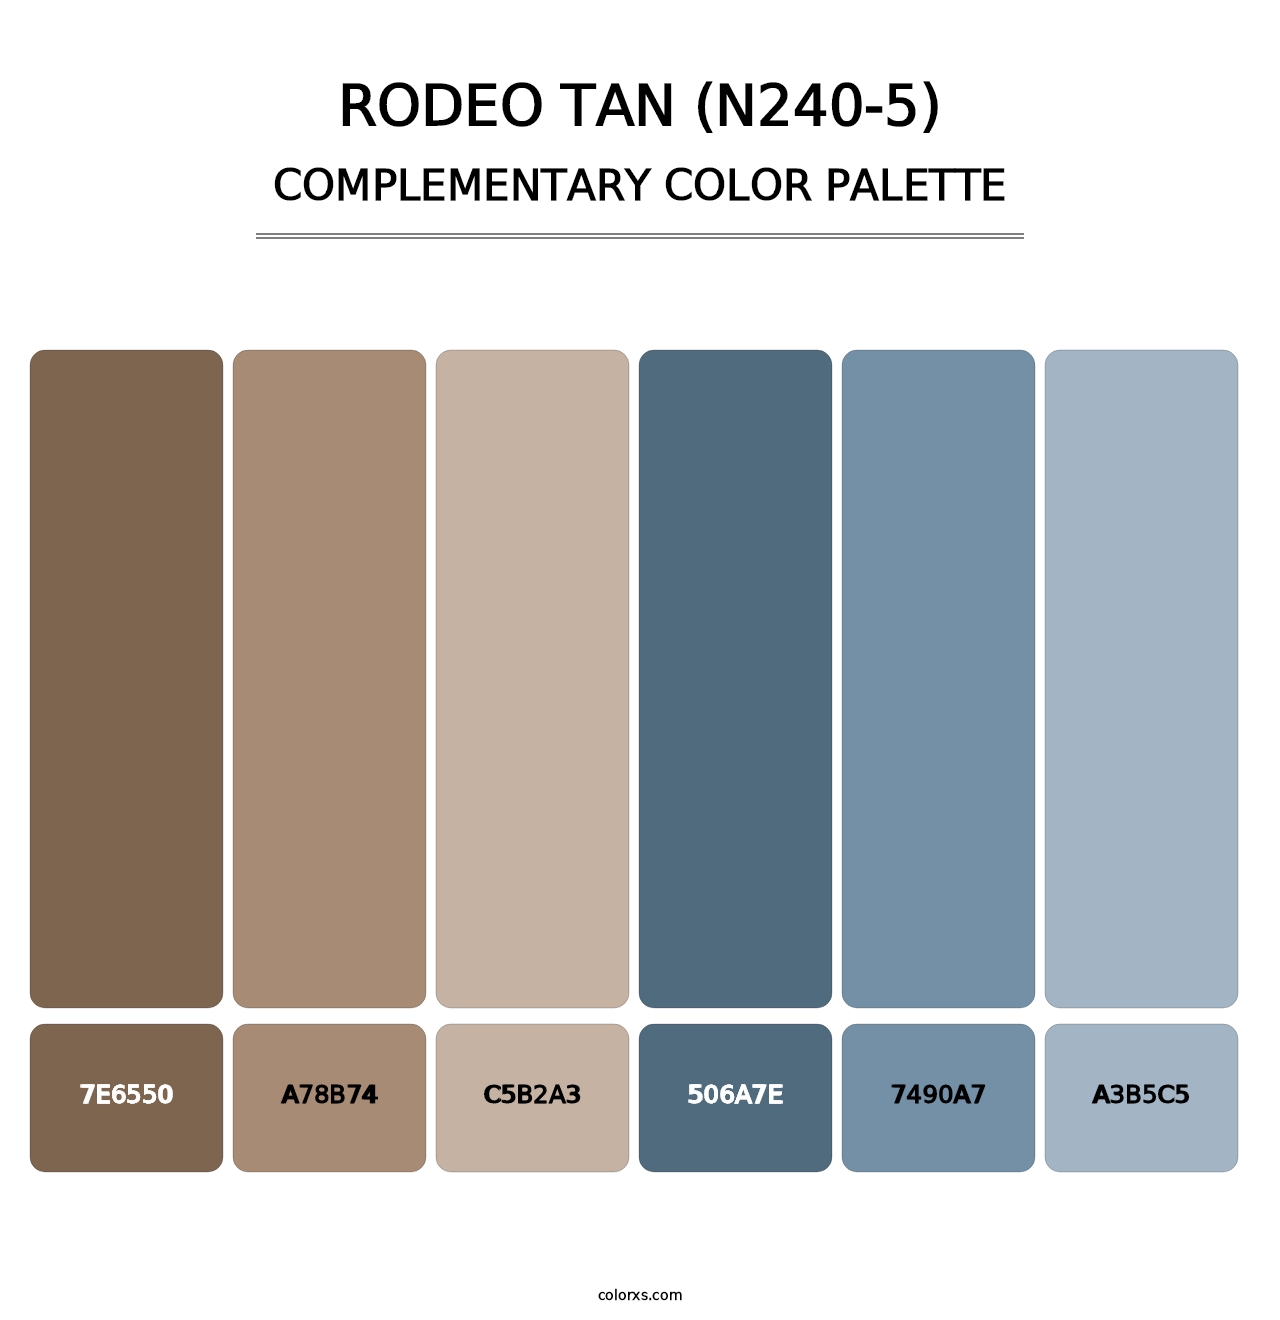 Rodeo Tan (N240-5) - Complementary Color Palette